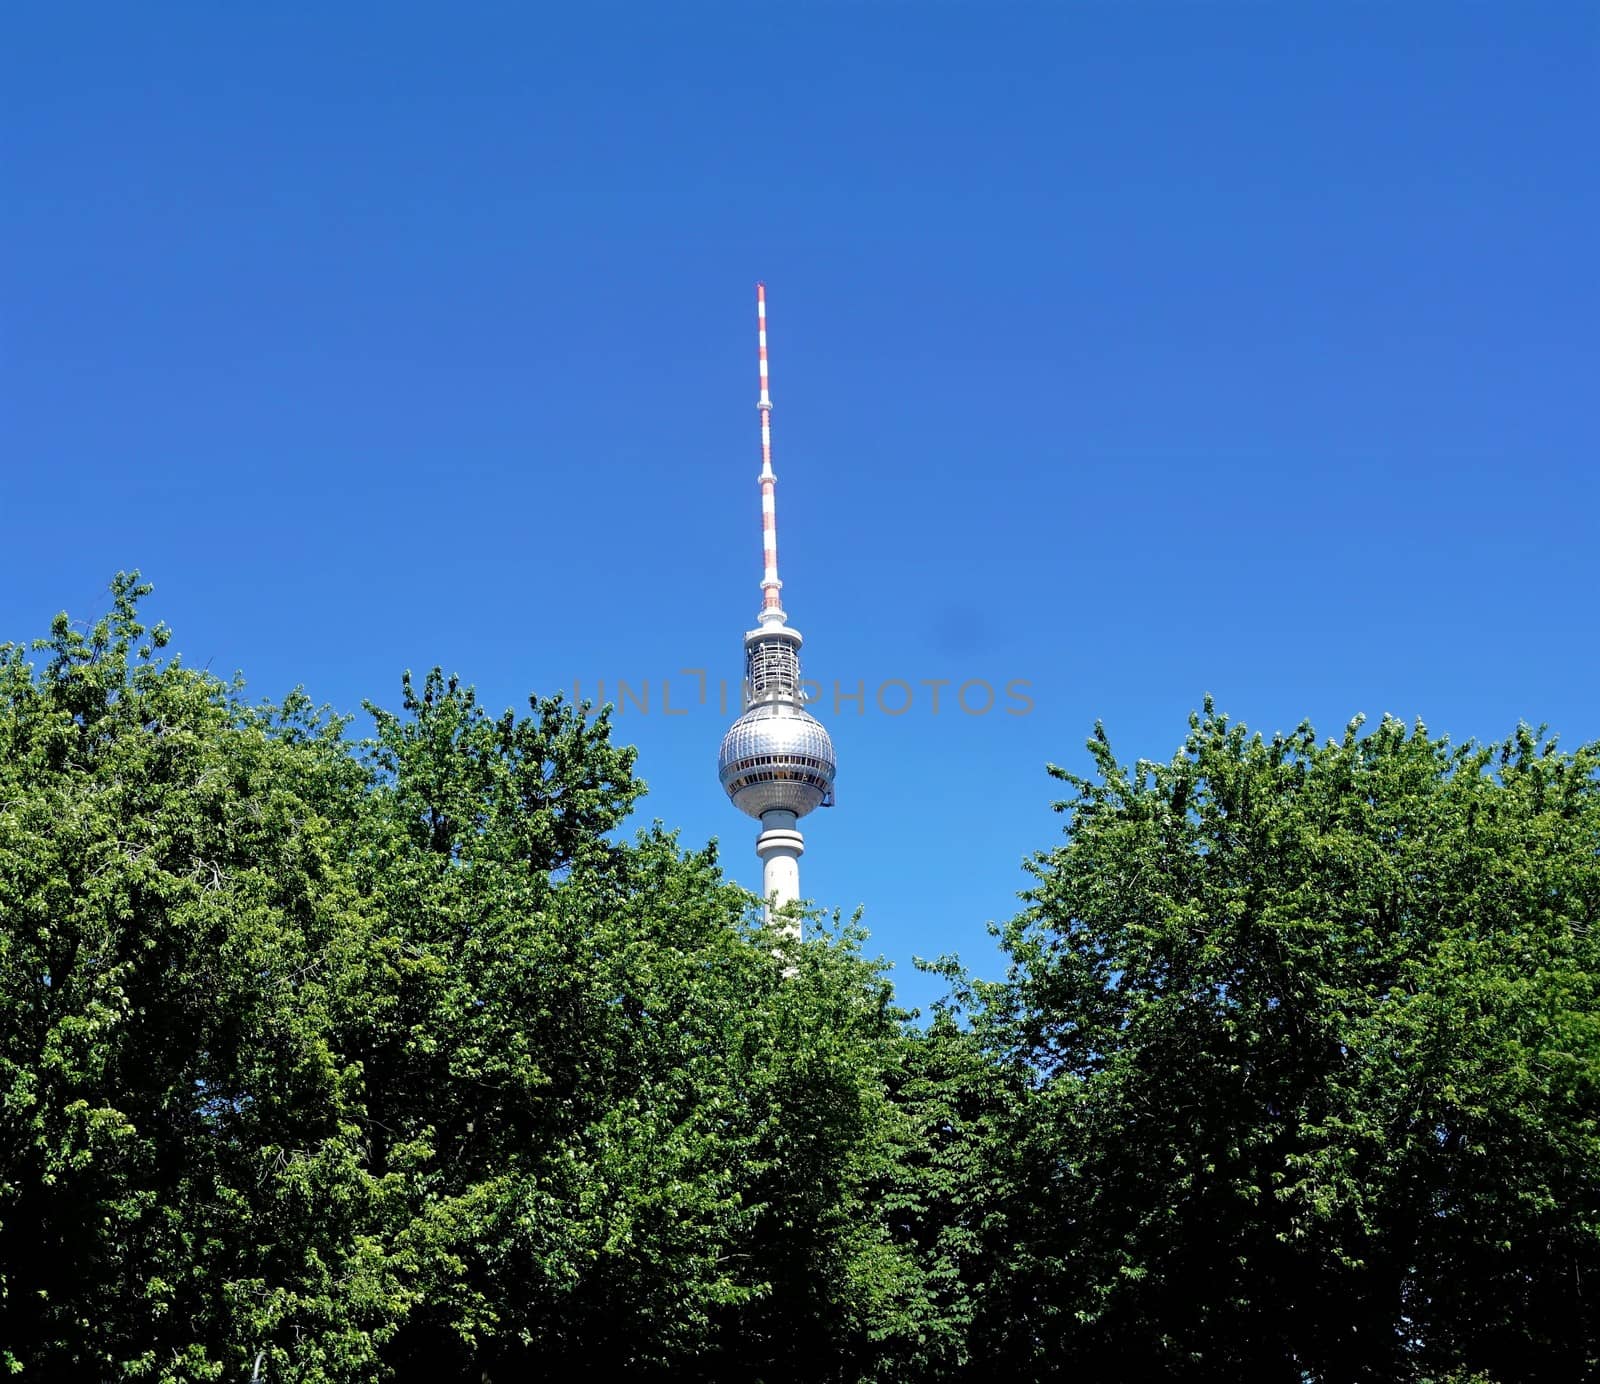 Berlin television tower behind trees and in front of blue sky